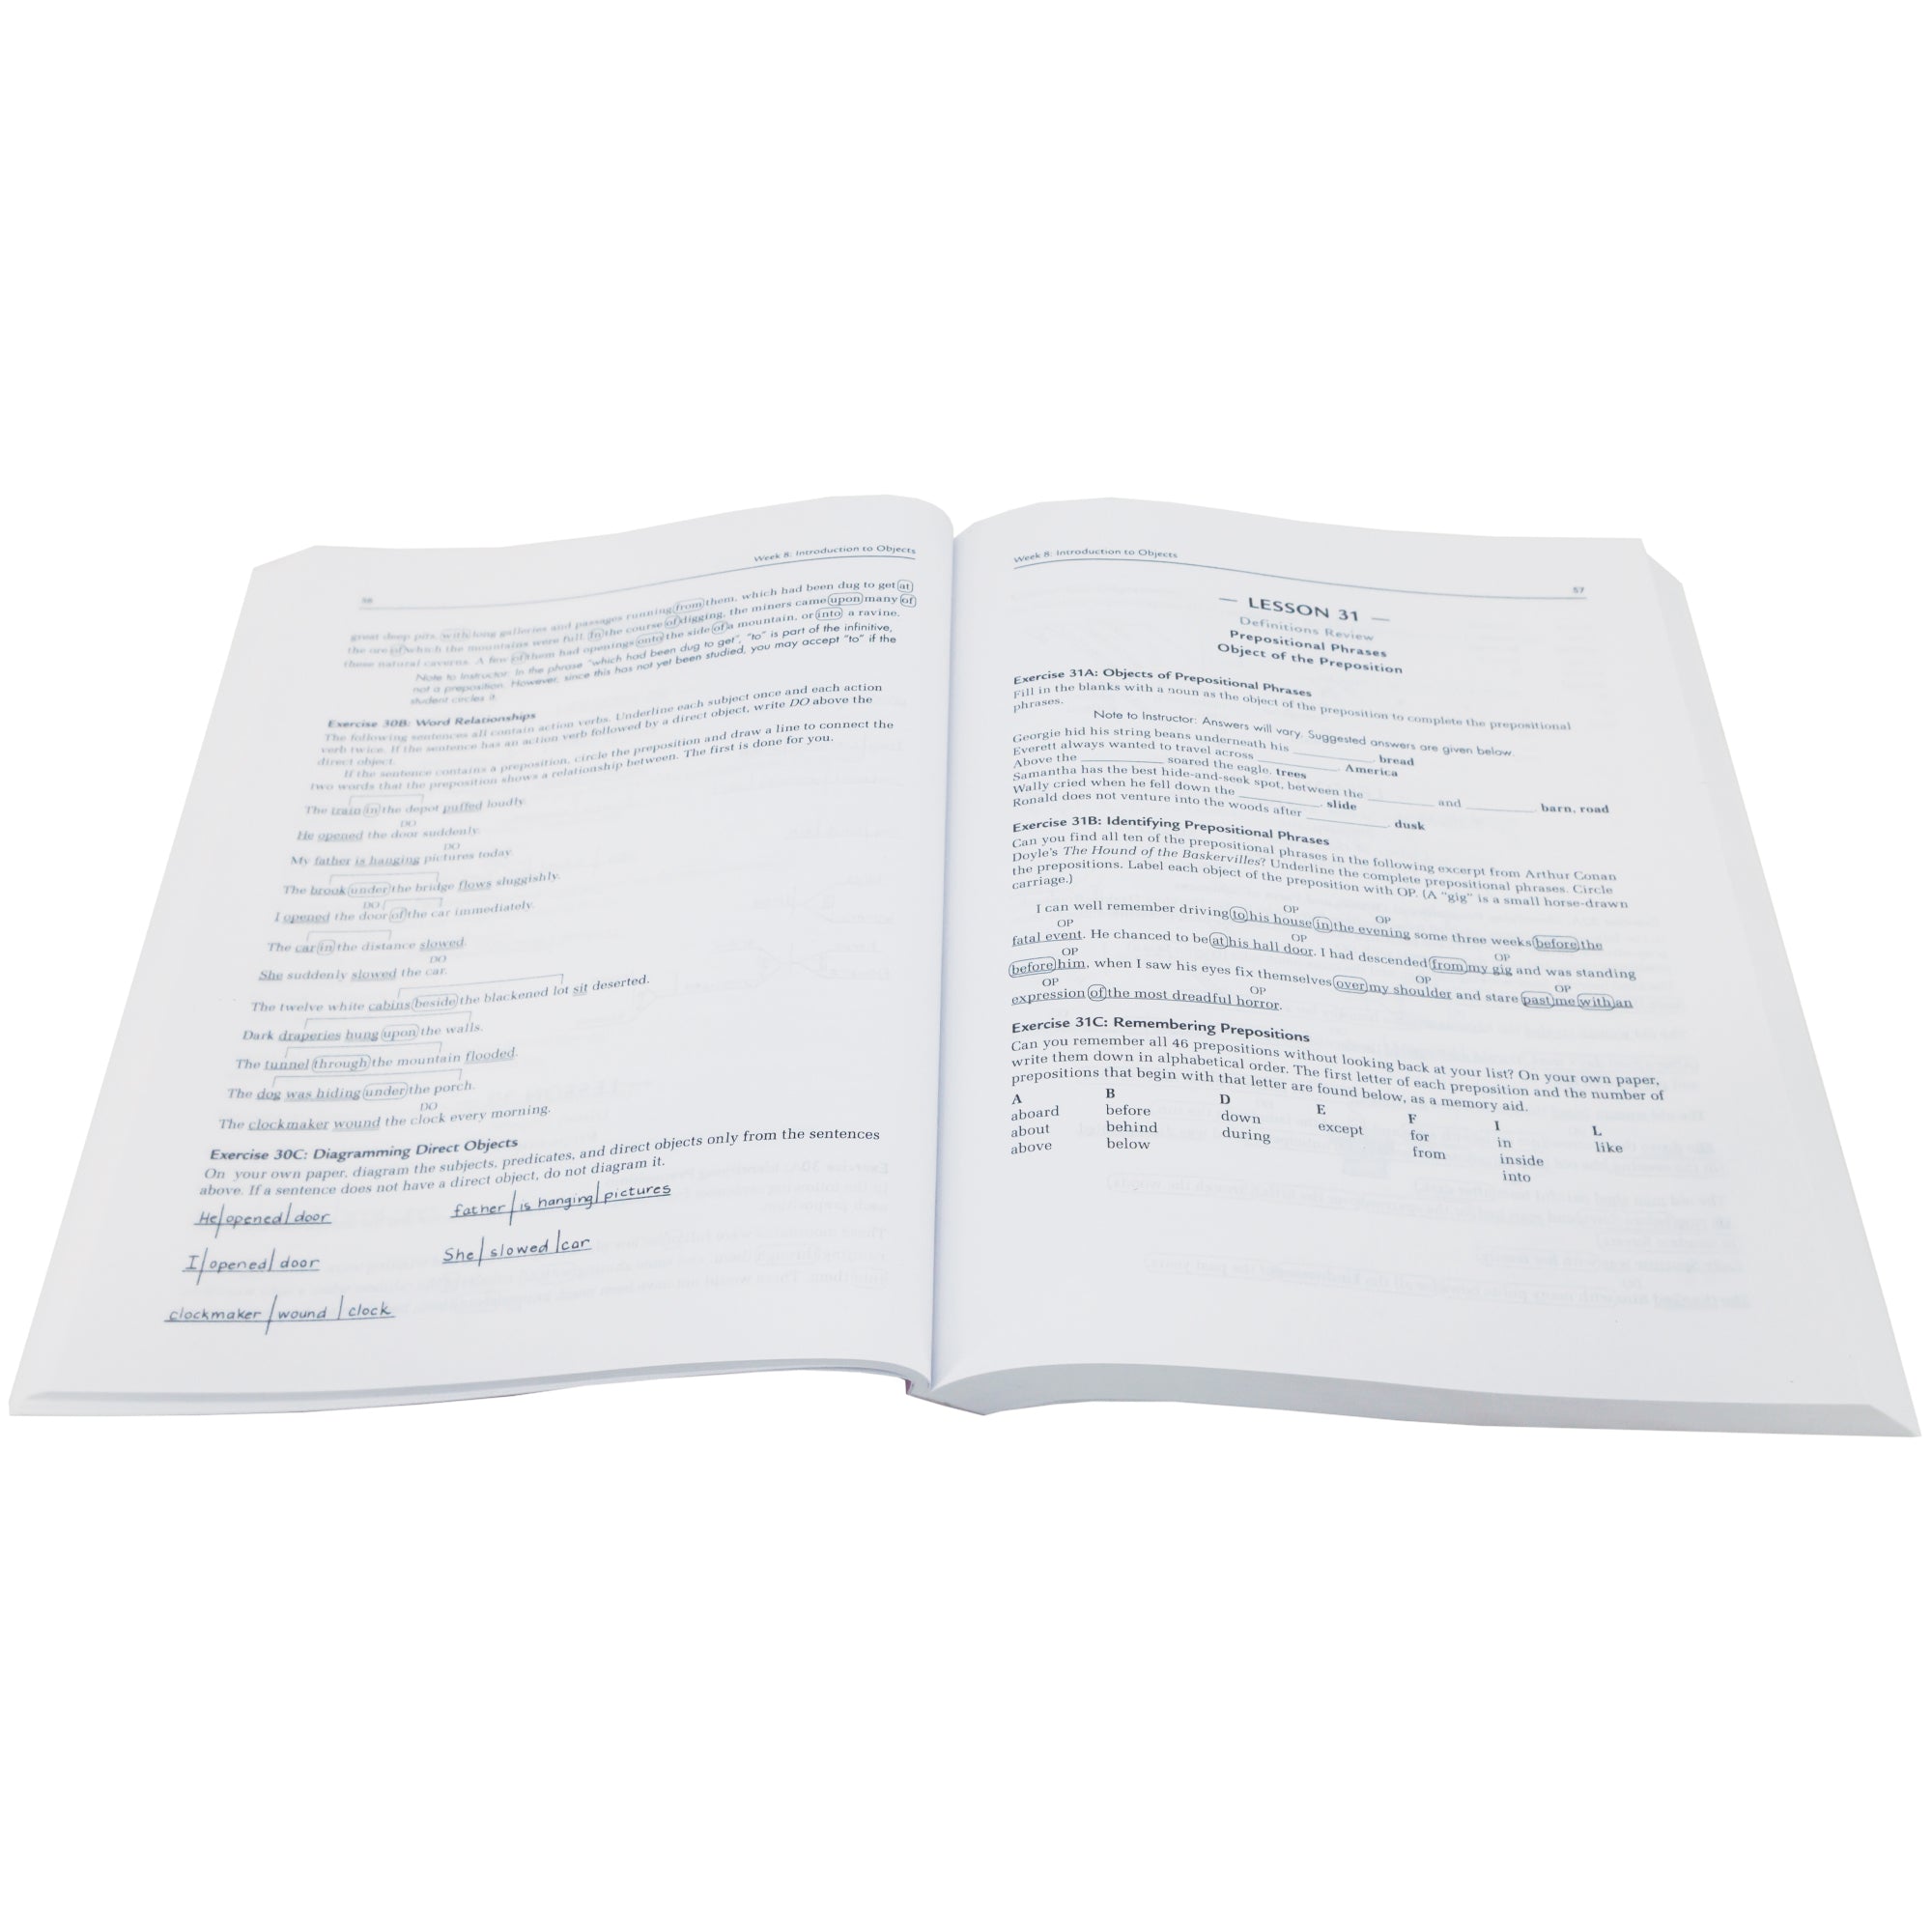 Grammar for the Well-Trained Mind book open to show the last page of lesson 30 that is focusing on Word Relationships and Diagramming Direct Objects on the left page and lesson 31 on the right that focuses on Definitions Review, Prepositional Phrases, and Objects of the Preposition.